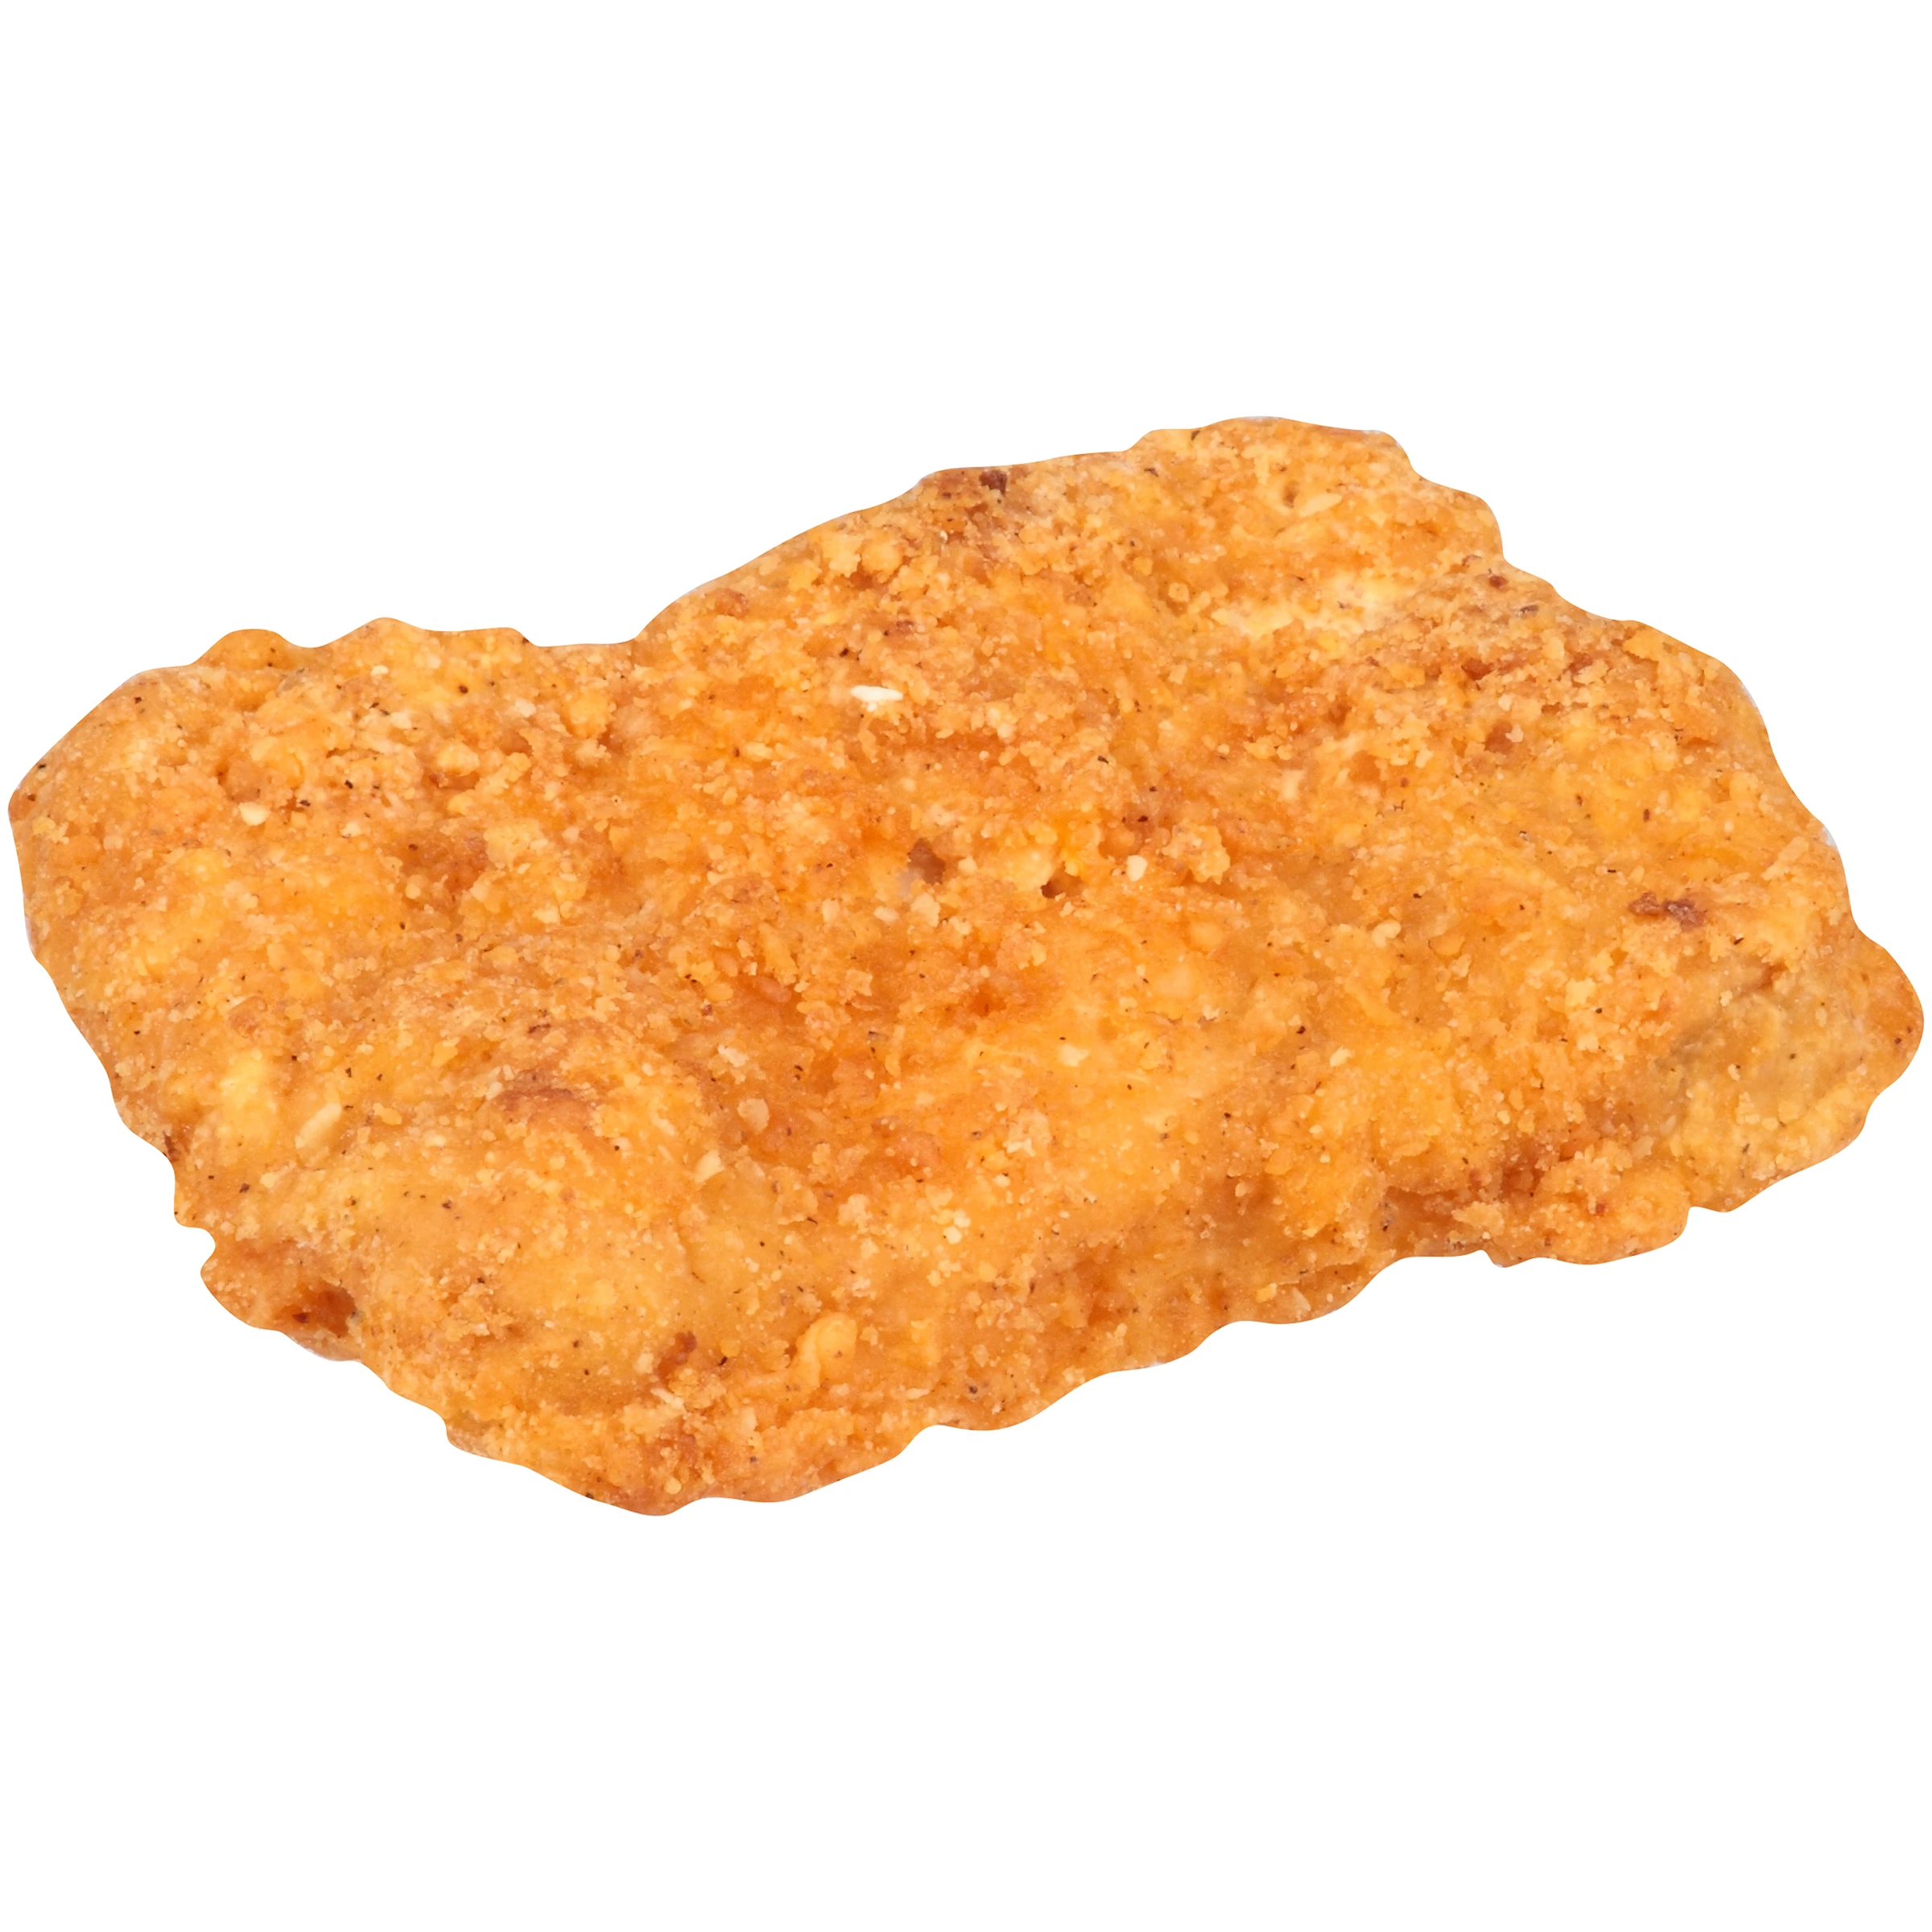 Tyson® Fully Cooked, Boneless, Skinless Portioned Breaded Chicken Thigh Filetshttp://images.salsify.com/image/upload/s--FbMni019--/u3nxmzqqxasaunsusim6.webp